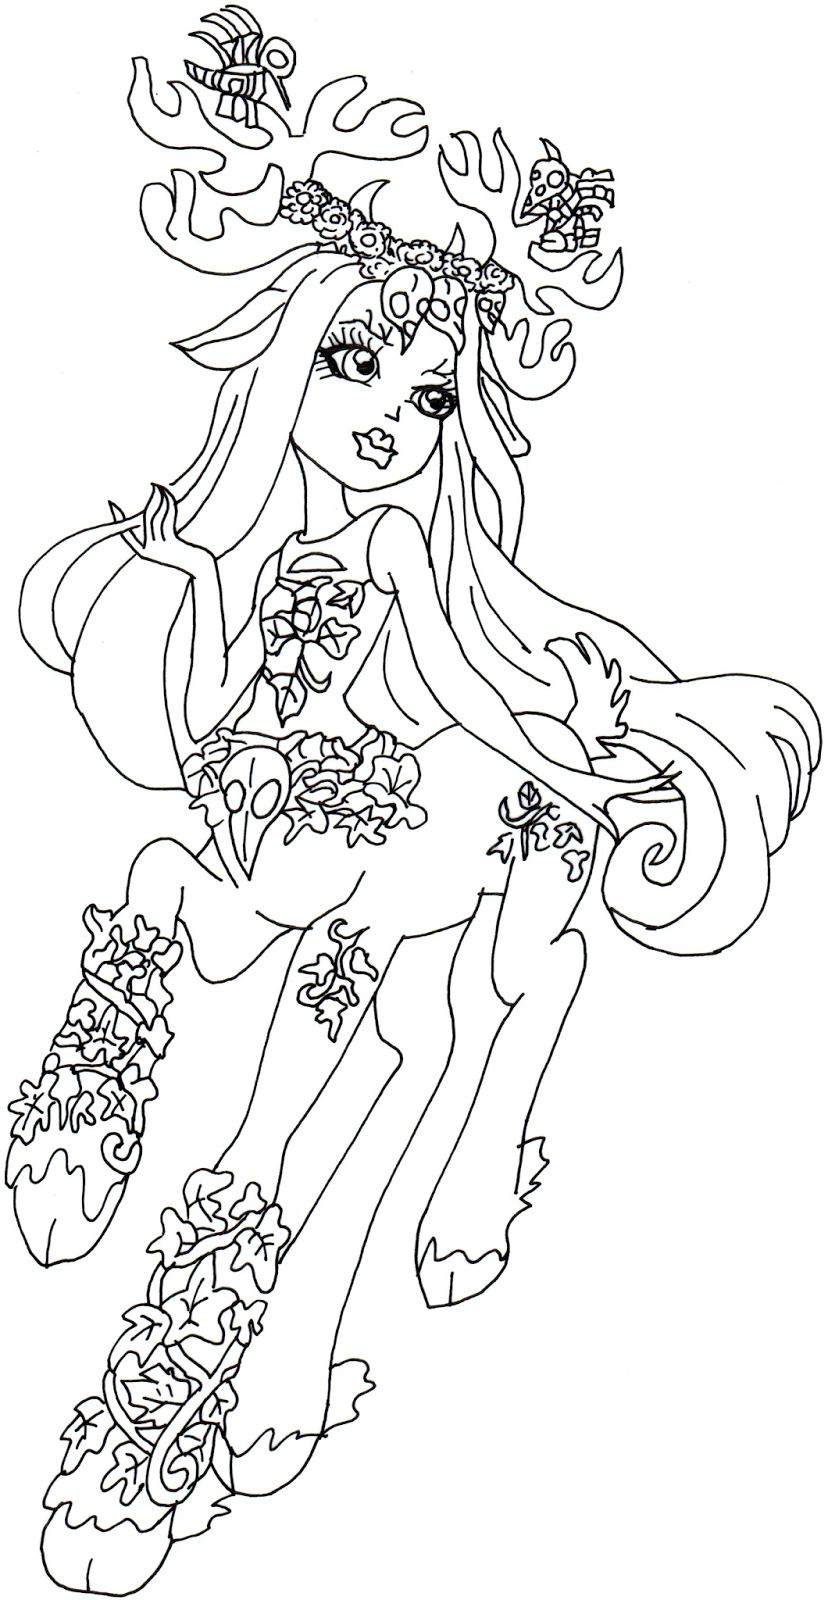 Download Free Printable Monster High Coloring Pages: Fawntine Fallowheart Monster High Coloring Page